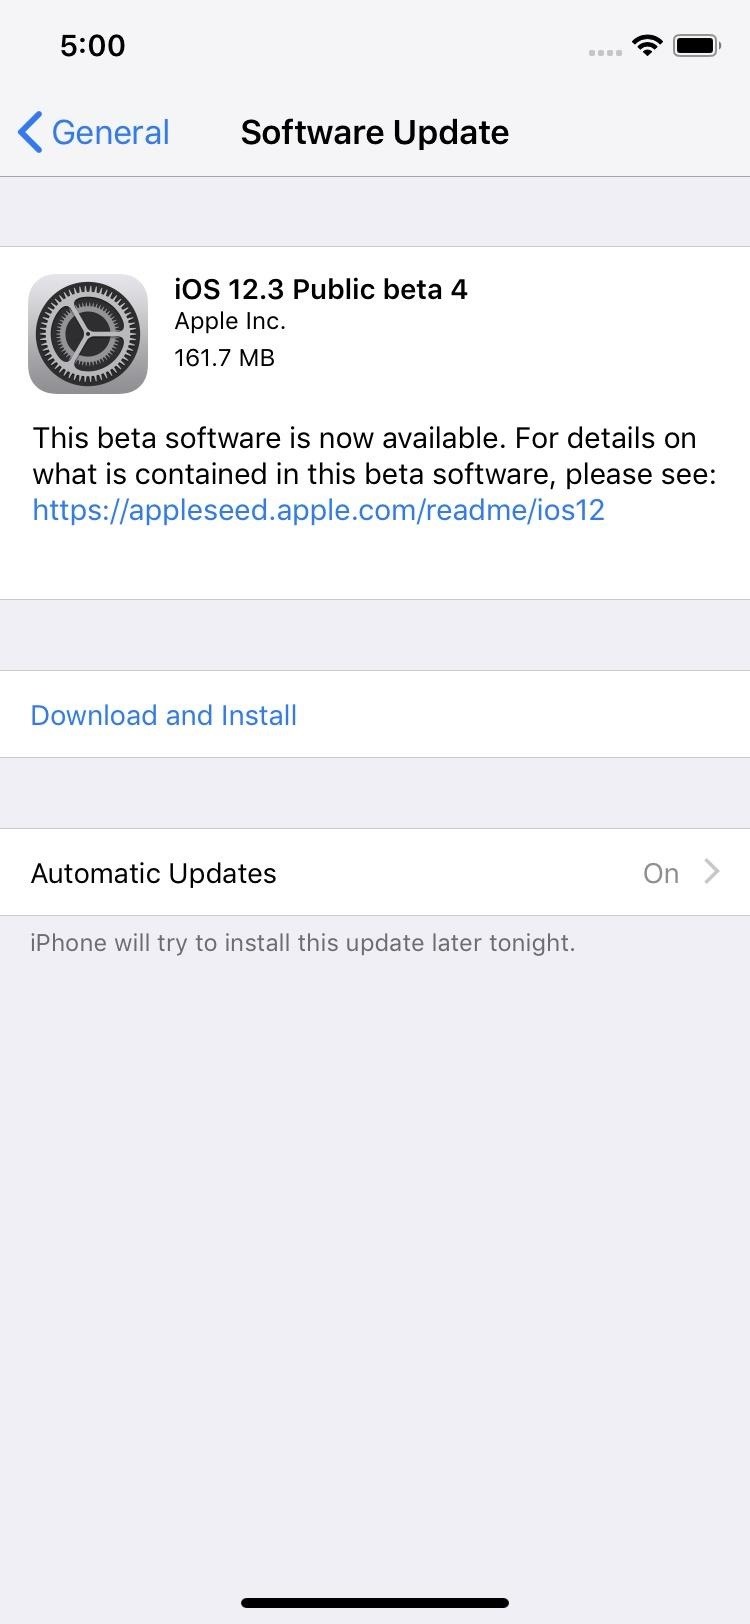 Apple Releases iOS 12.3 Public Beta 4 for iPhone to Software Testers